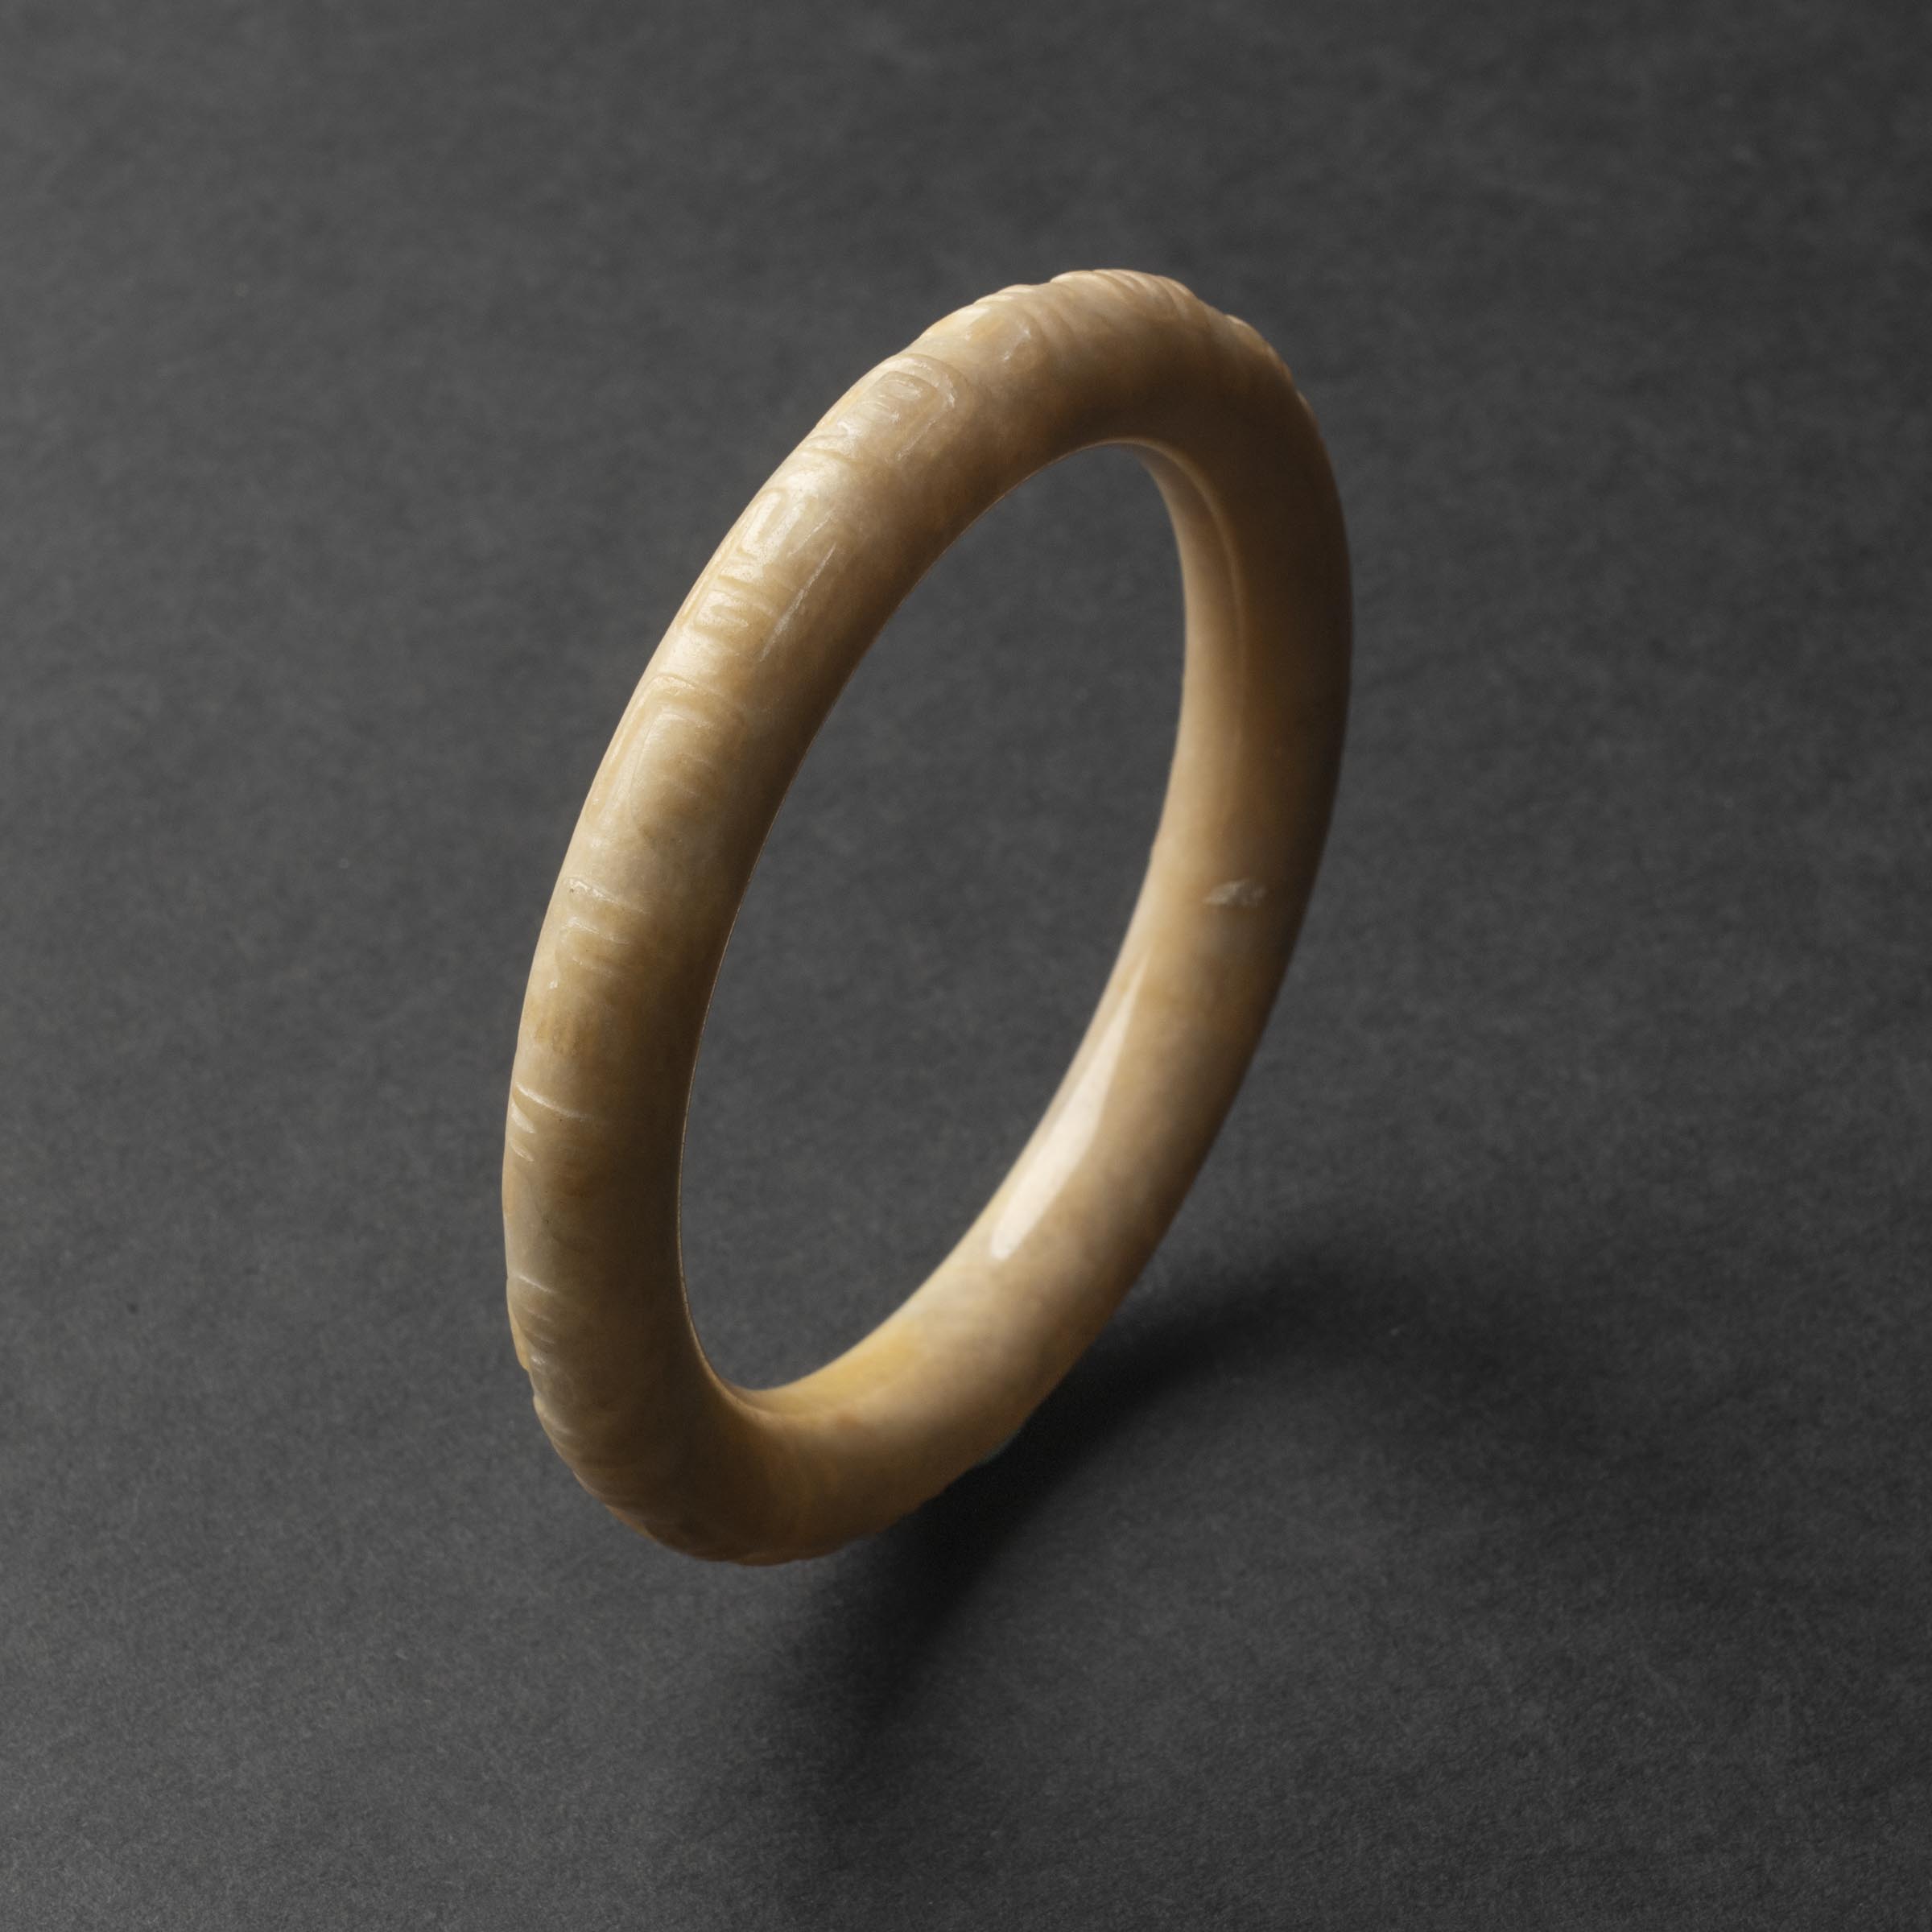 A White Jade Bangle with Inscription, Ming Dynasty (1368-1644)